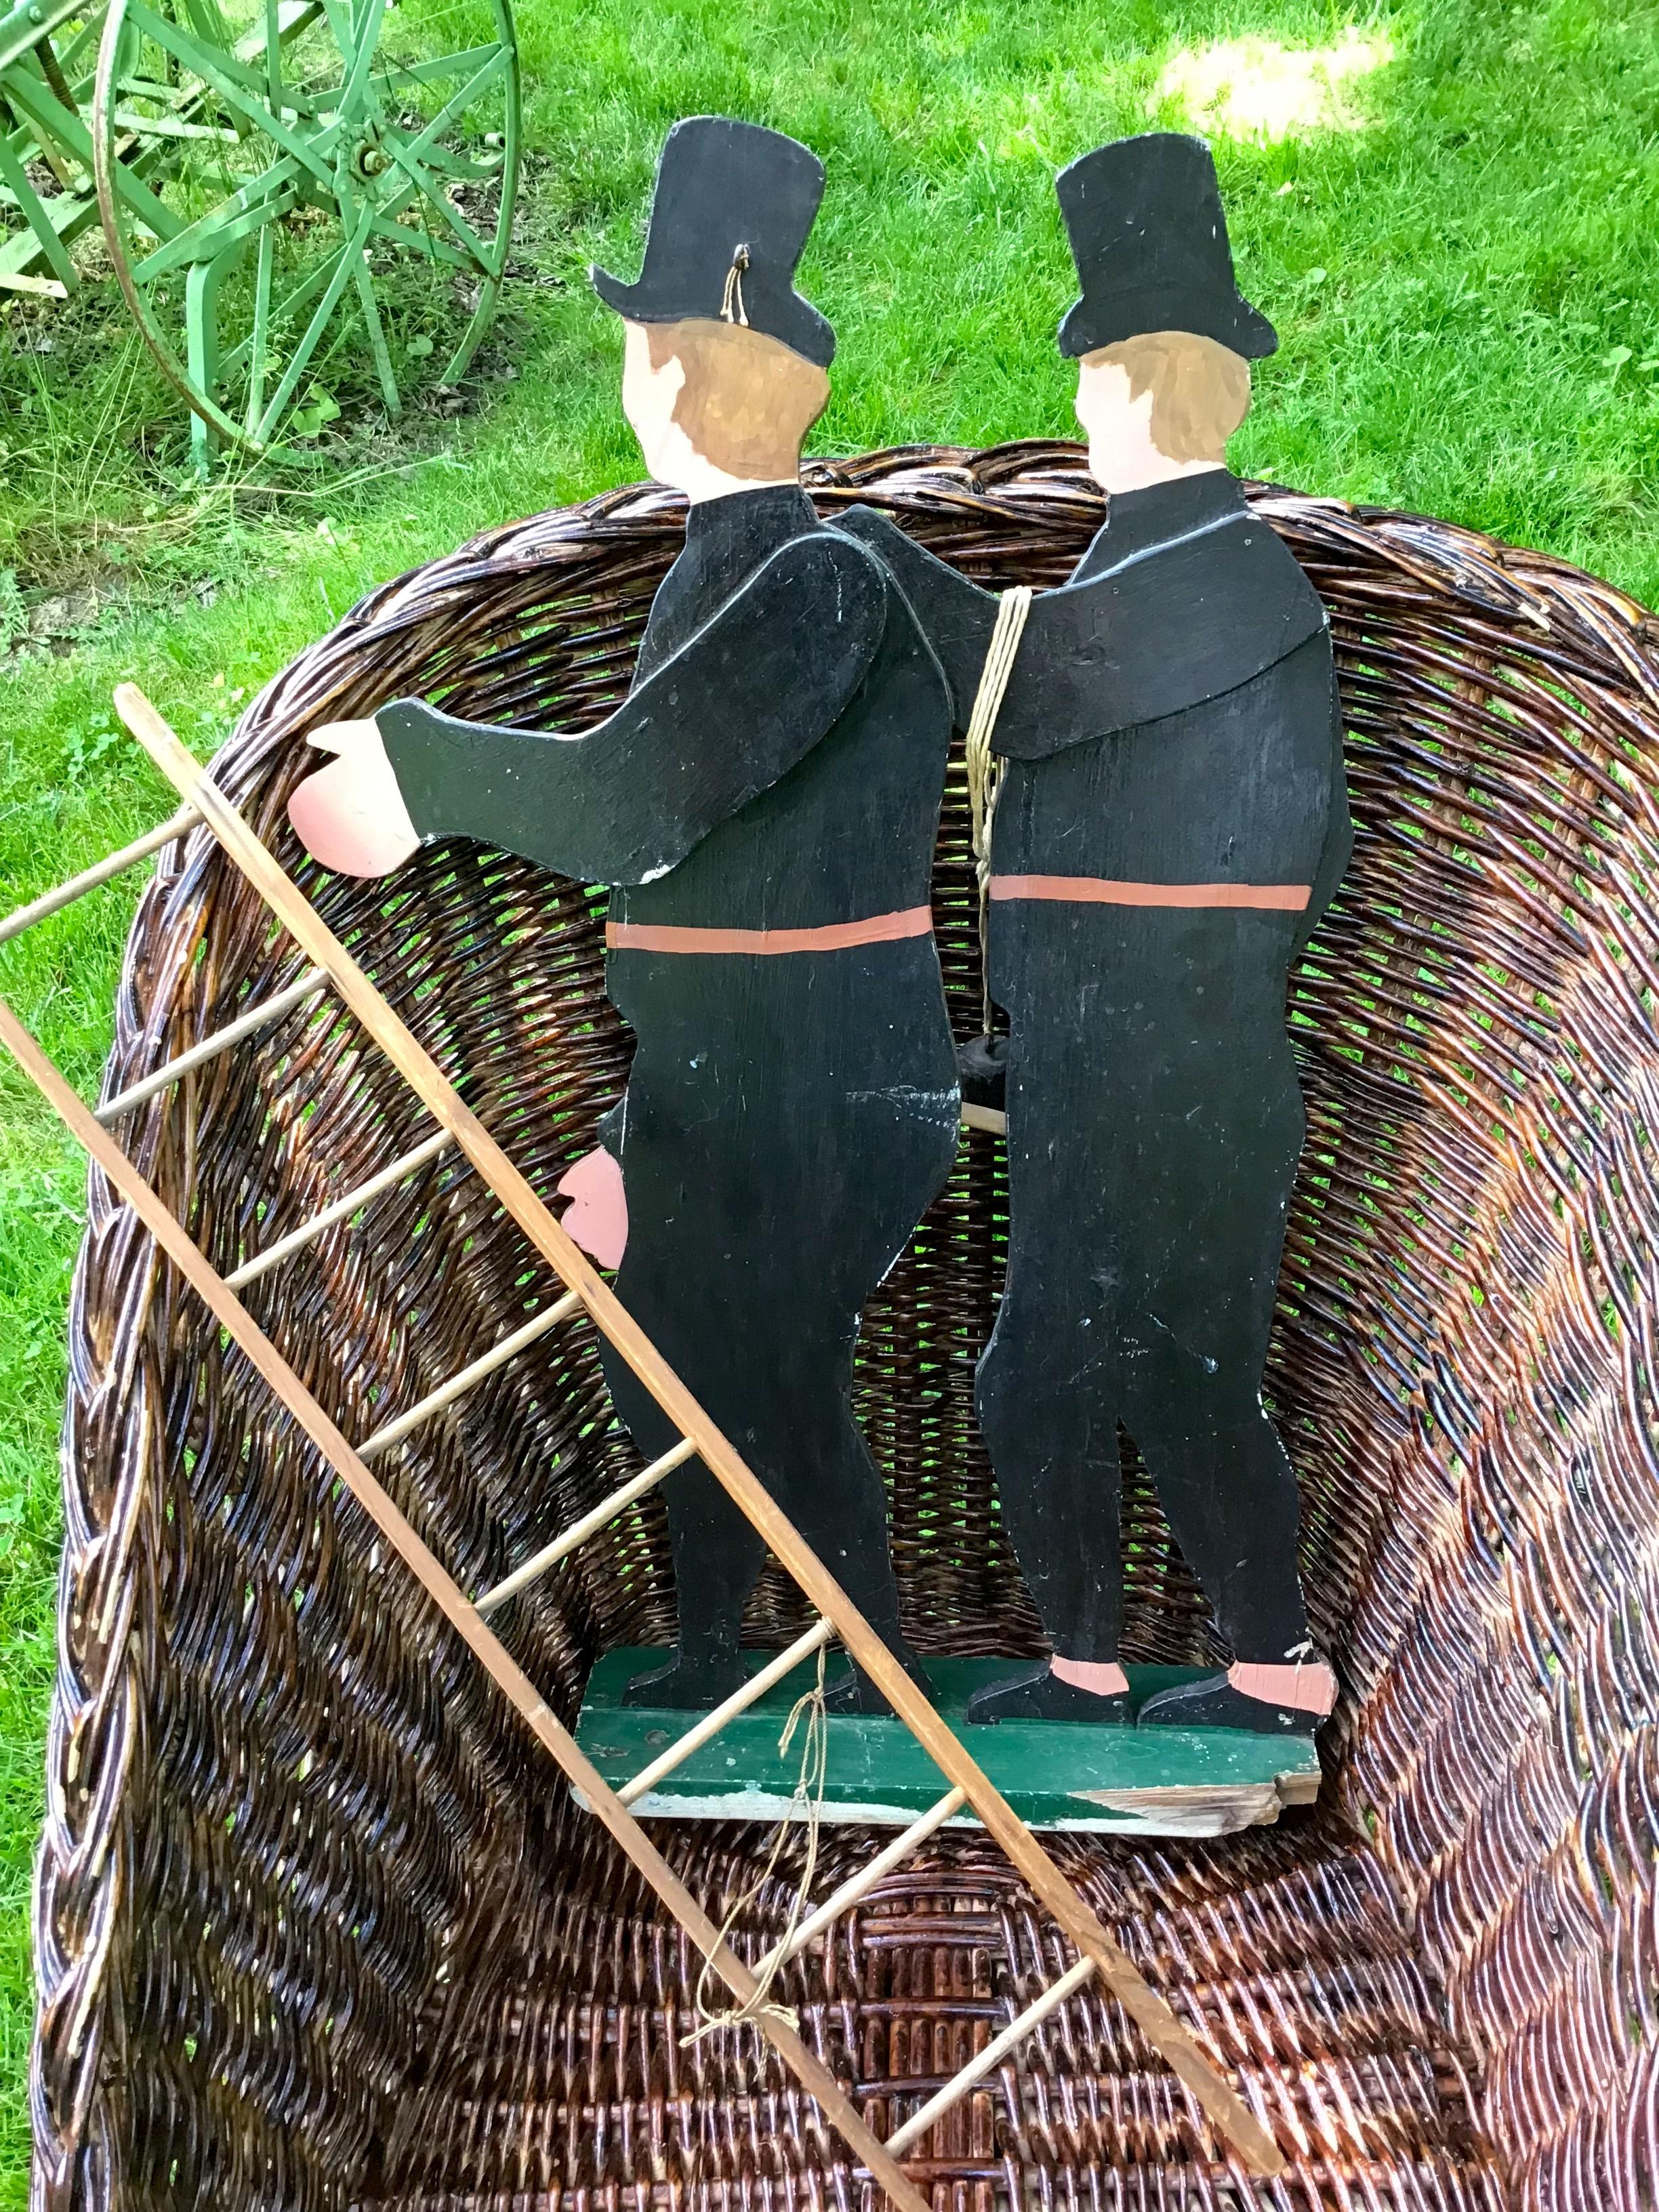 This whimsical folk art sculpture is a folk art toy of chimney sweeps. The outsider art is hand painted on wood cutouts. A wonderful hand made, hand painted piece of folk art, outsider art, and a primitive toy. 
The arms are not moveable on this